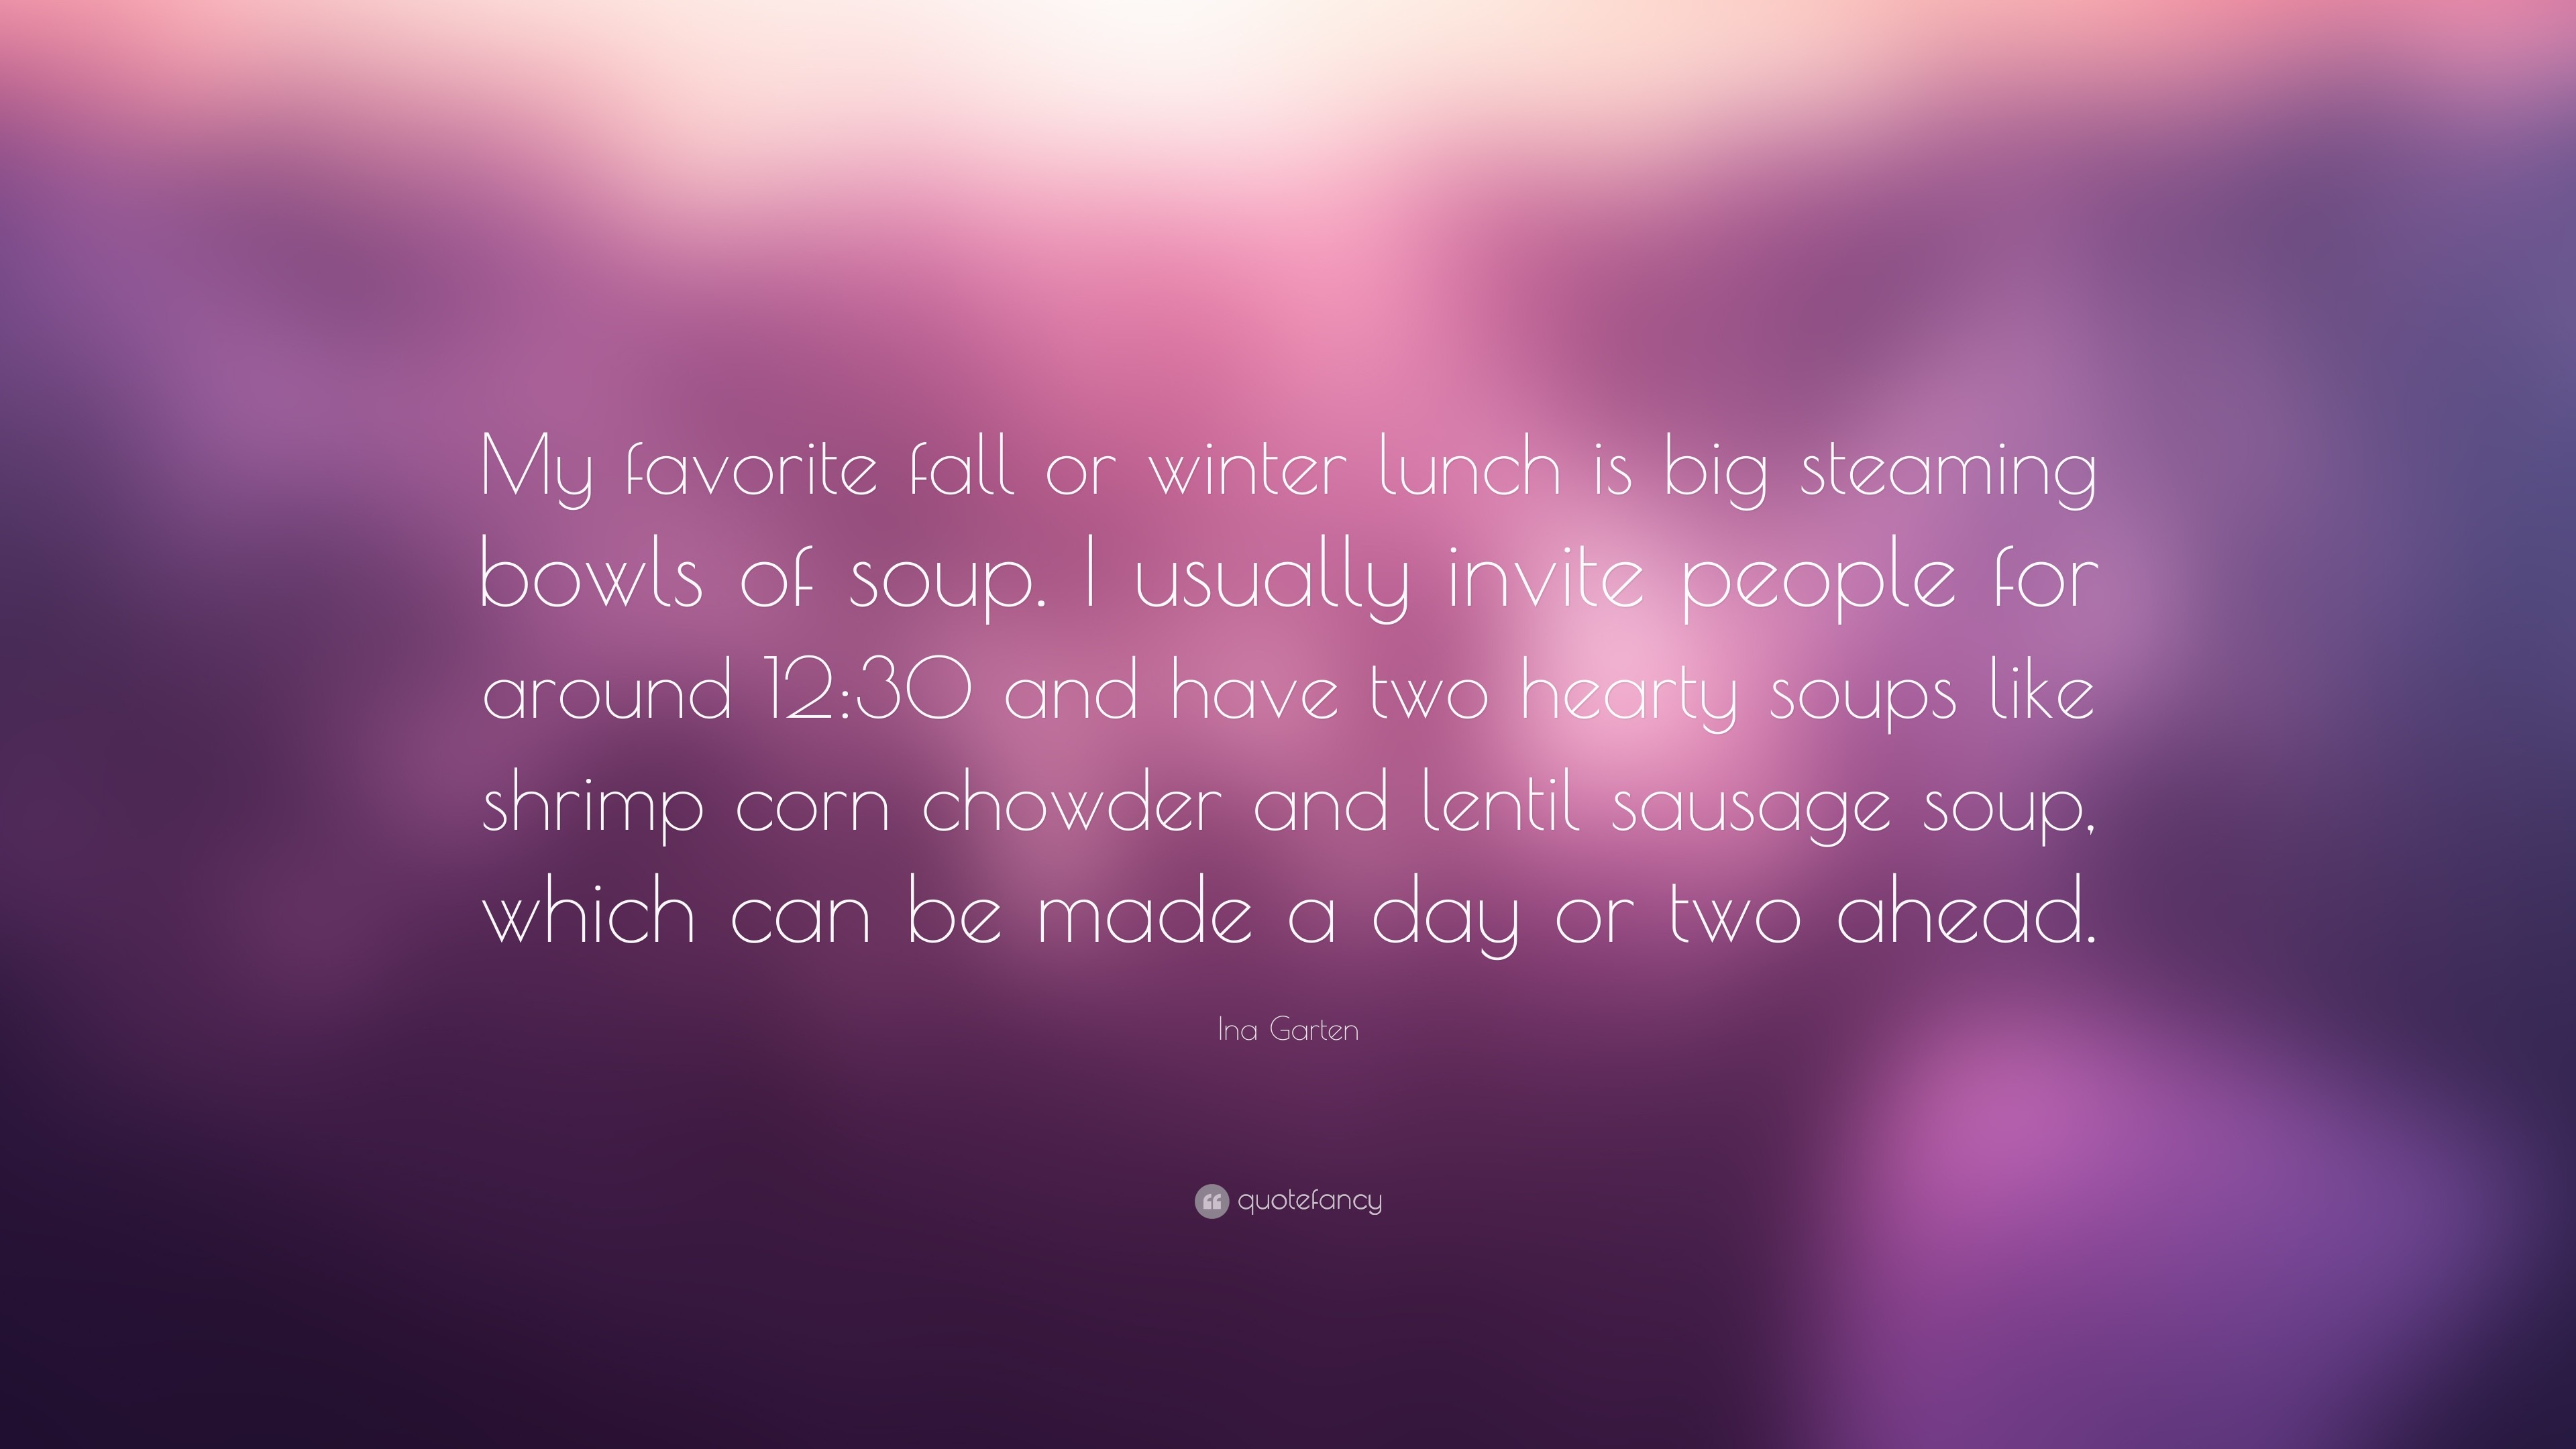 3840x2160 Ina Garten Quote: “My favorite fall or winter lunch is big steaming bowls of